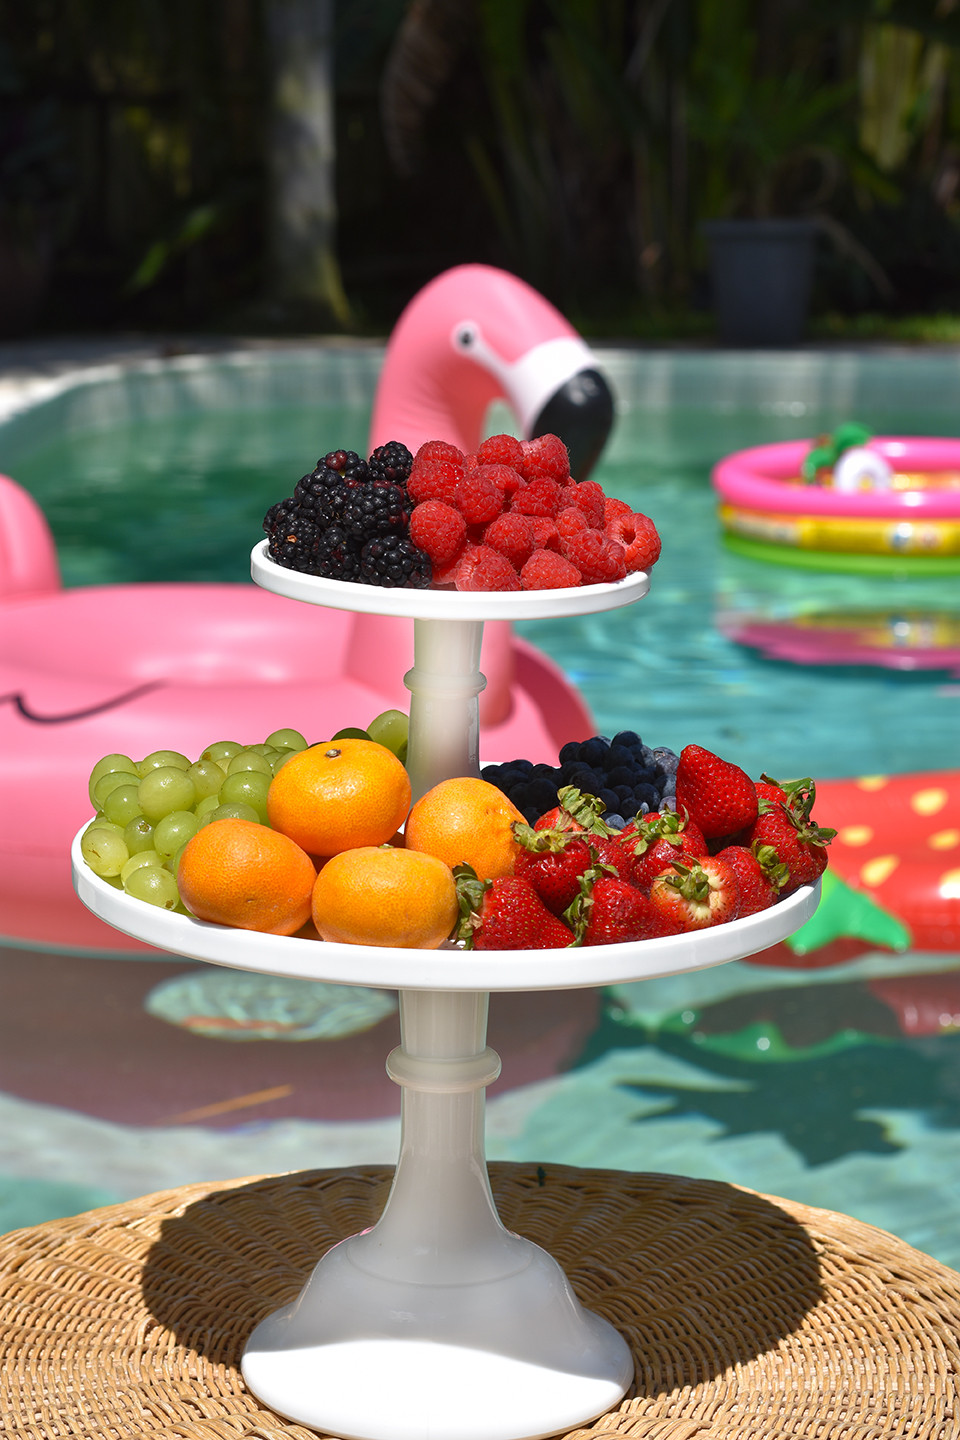 Pool Party Ideas For Birthdays
 Pool Party Ideas for Adults • Happy Family Blog